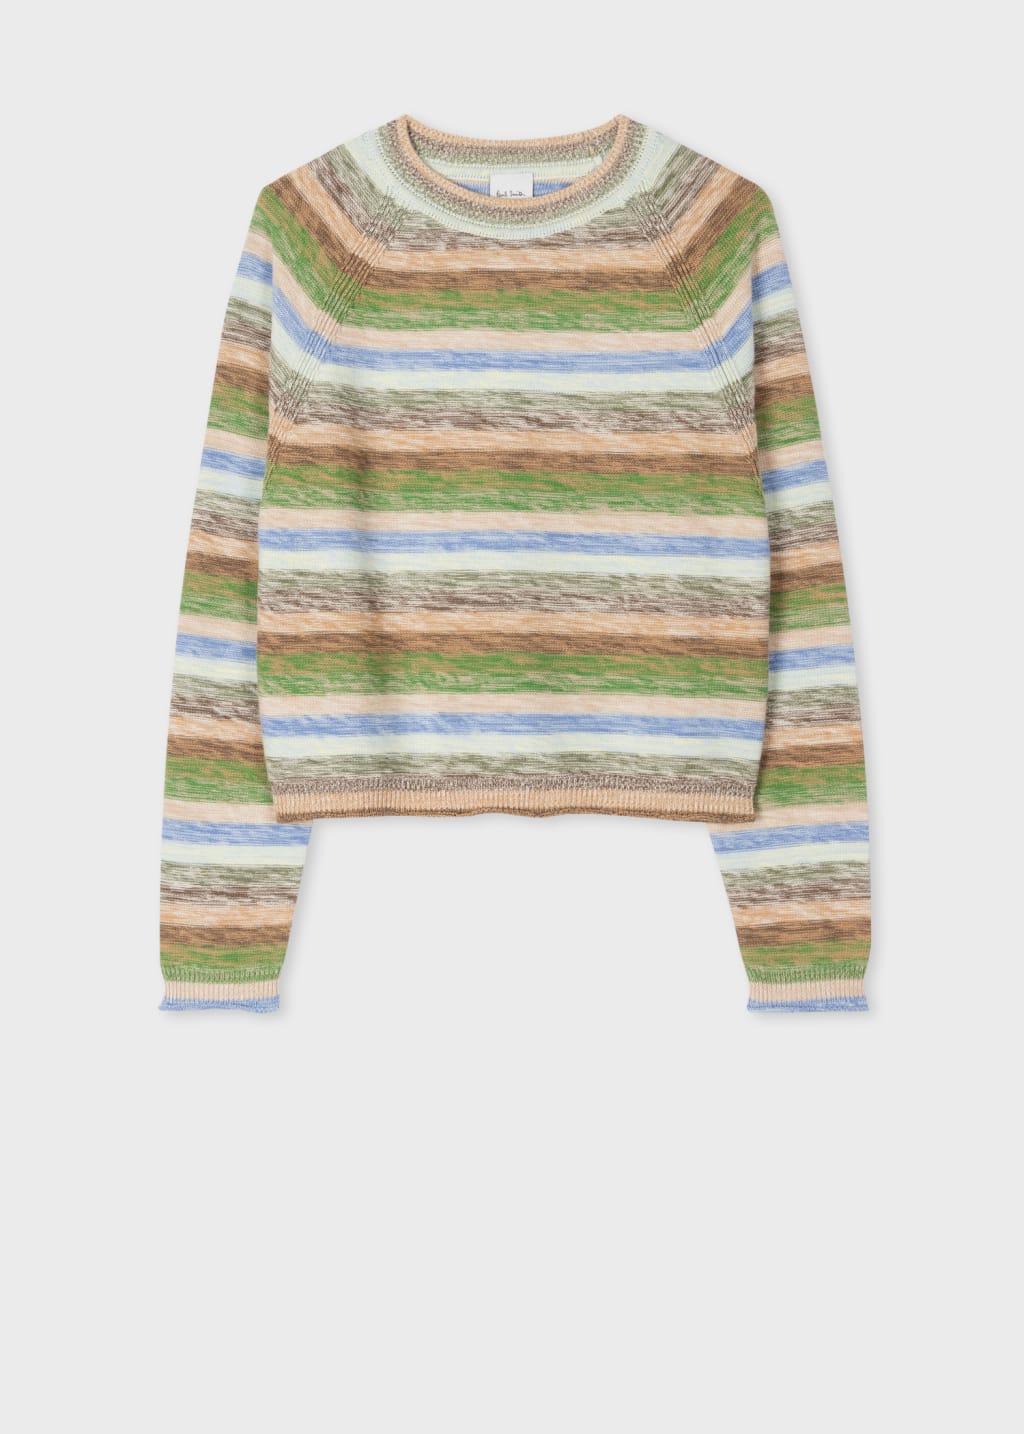 Front View - Women's Green Space Dye Crew Neck Sweater Paul Smith